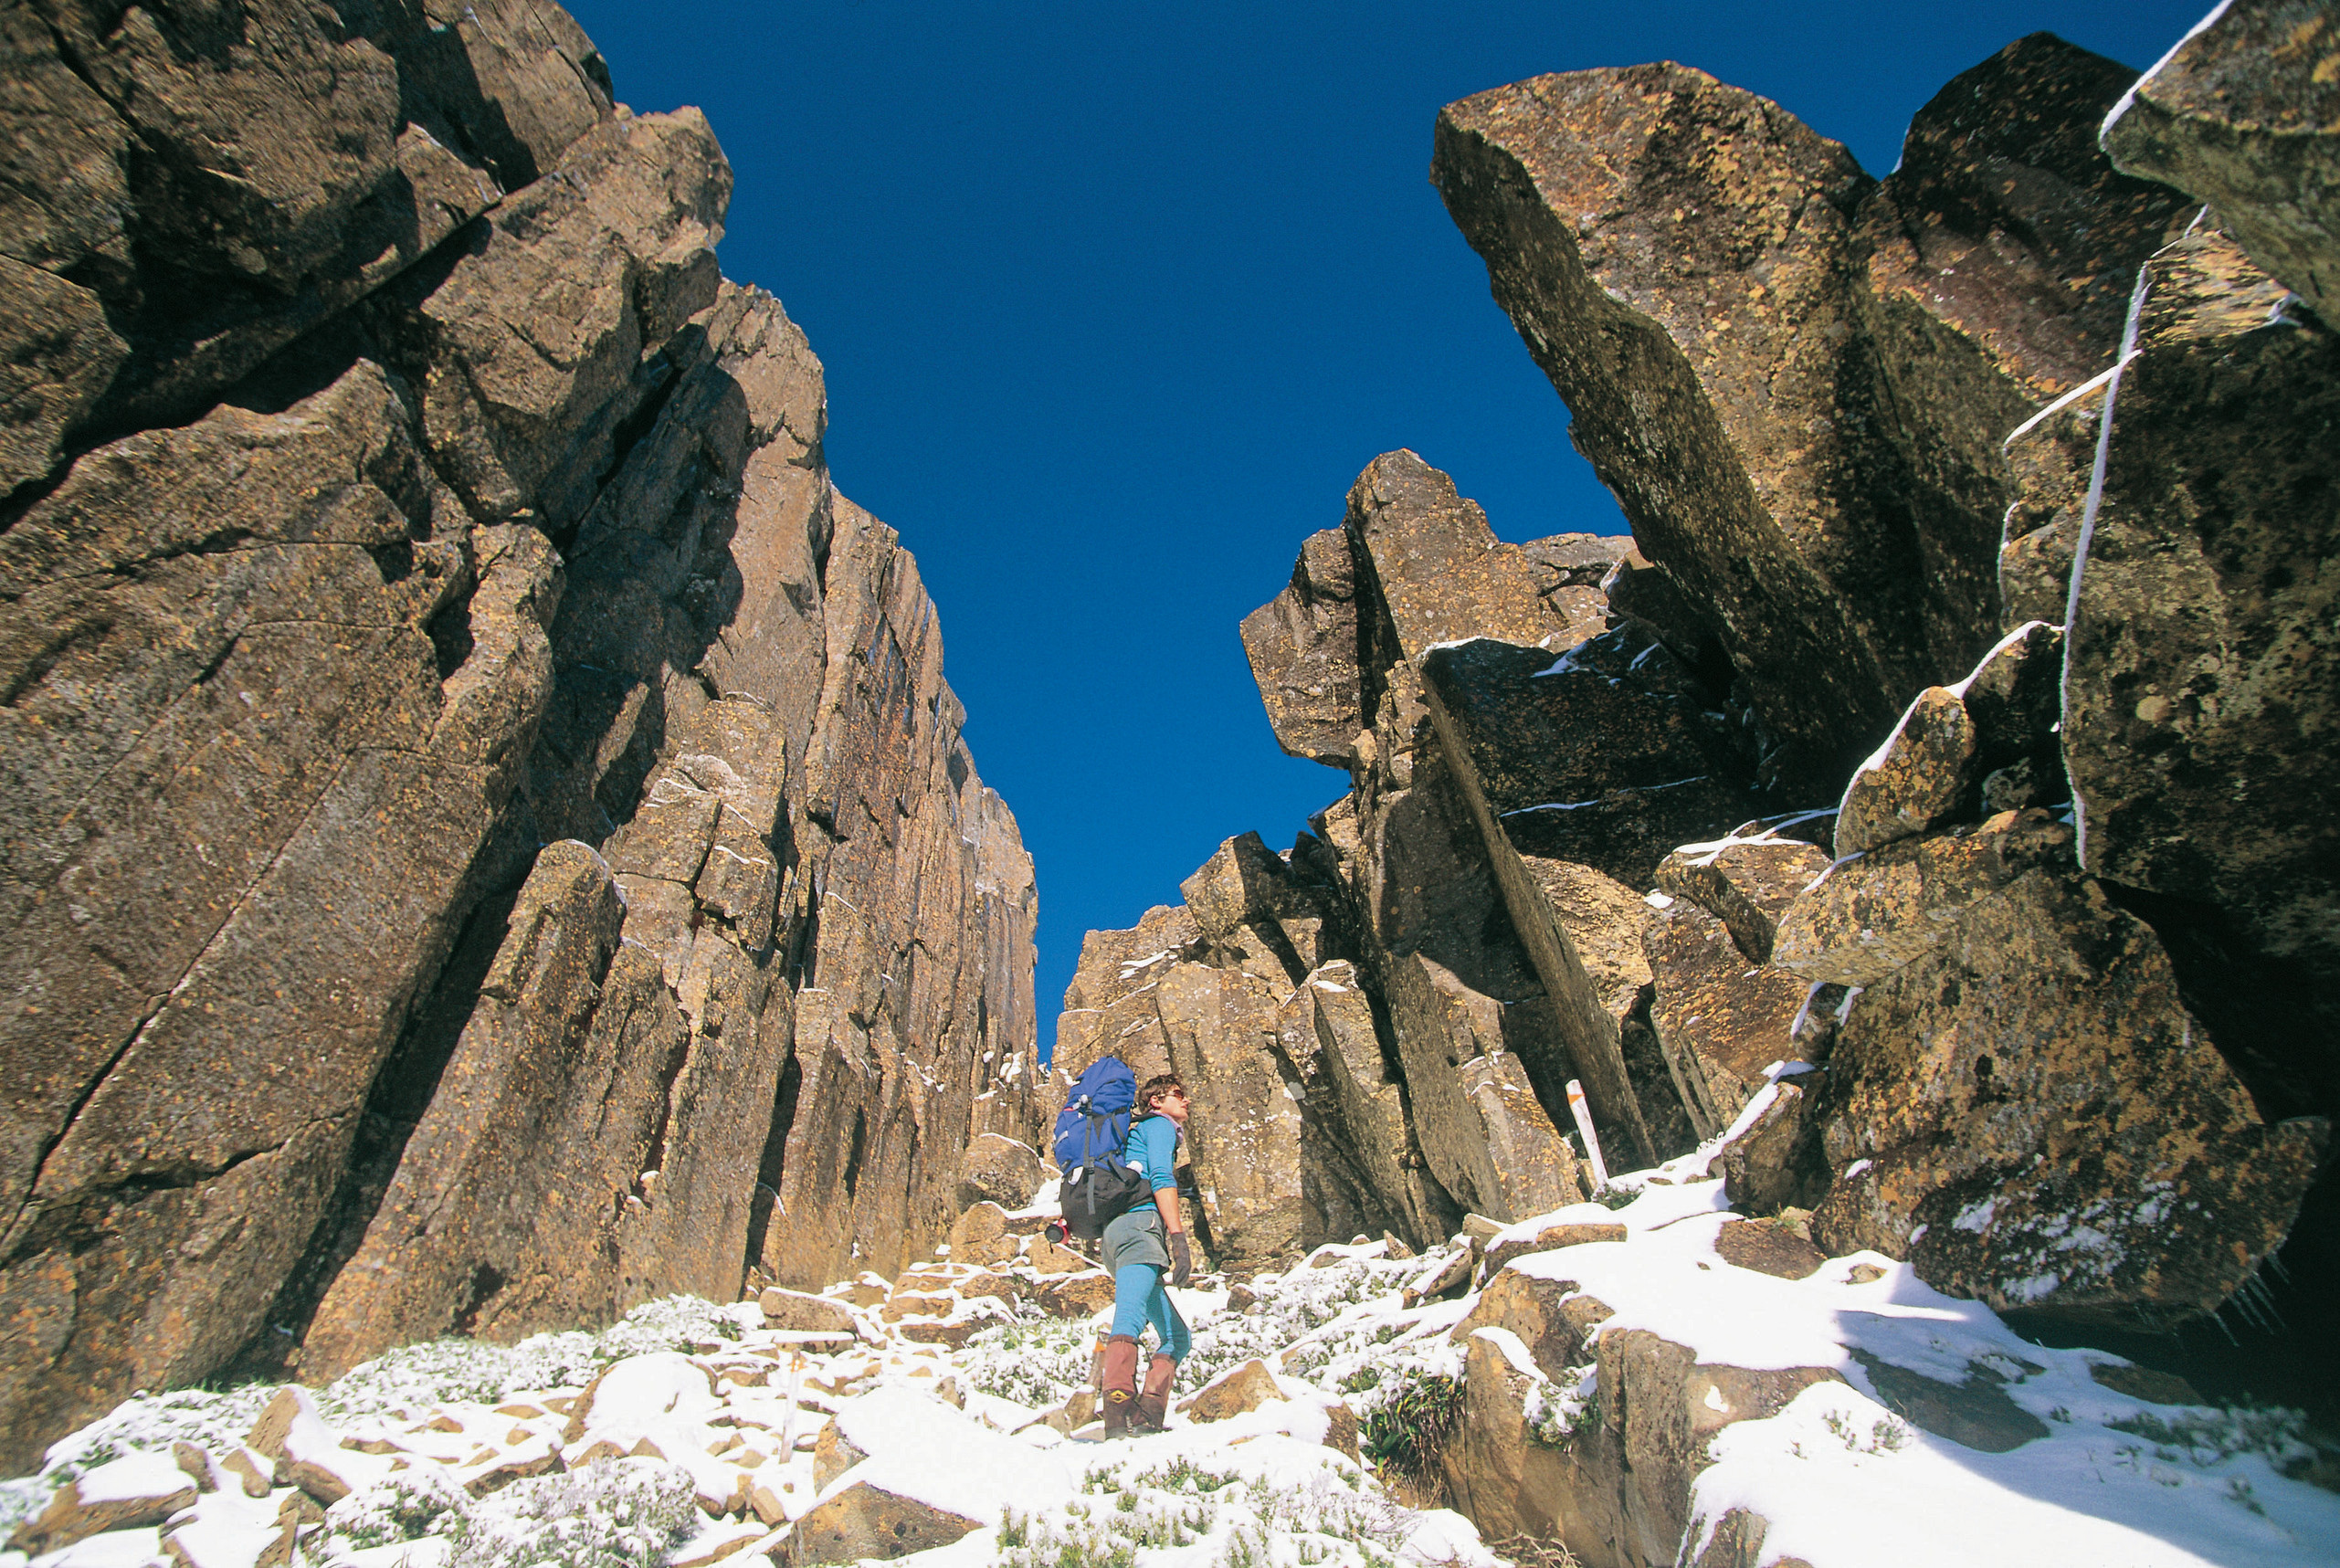 A hiker on the climb to Mt Ossa, Overland Track. The ground is covered in snow.